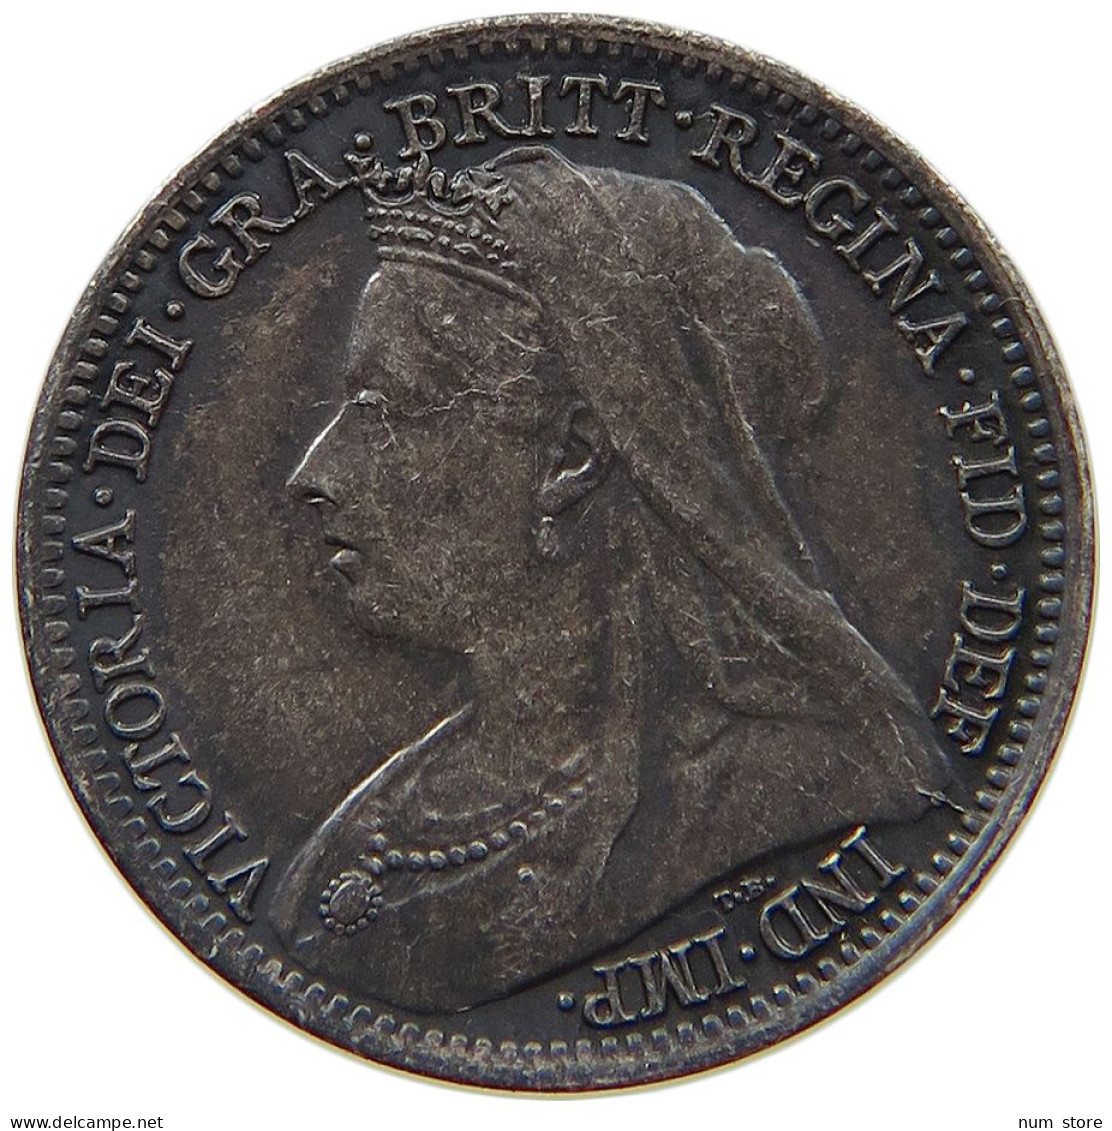 GREAT BRITAIN THREEPENCE 1901 Victoria 1837-1901 #t078 0415 - F. 3 Pence